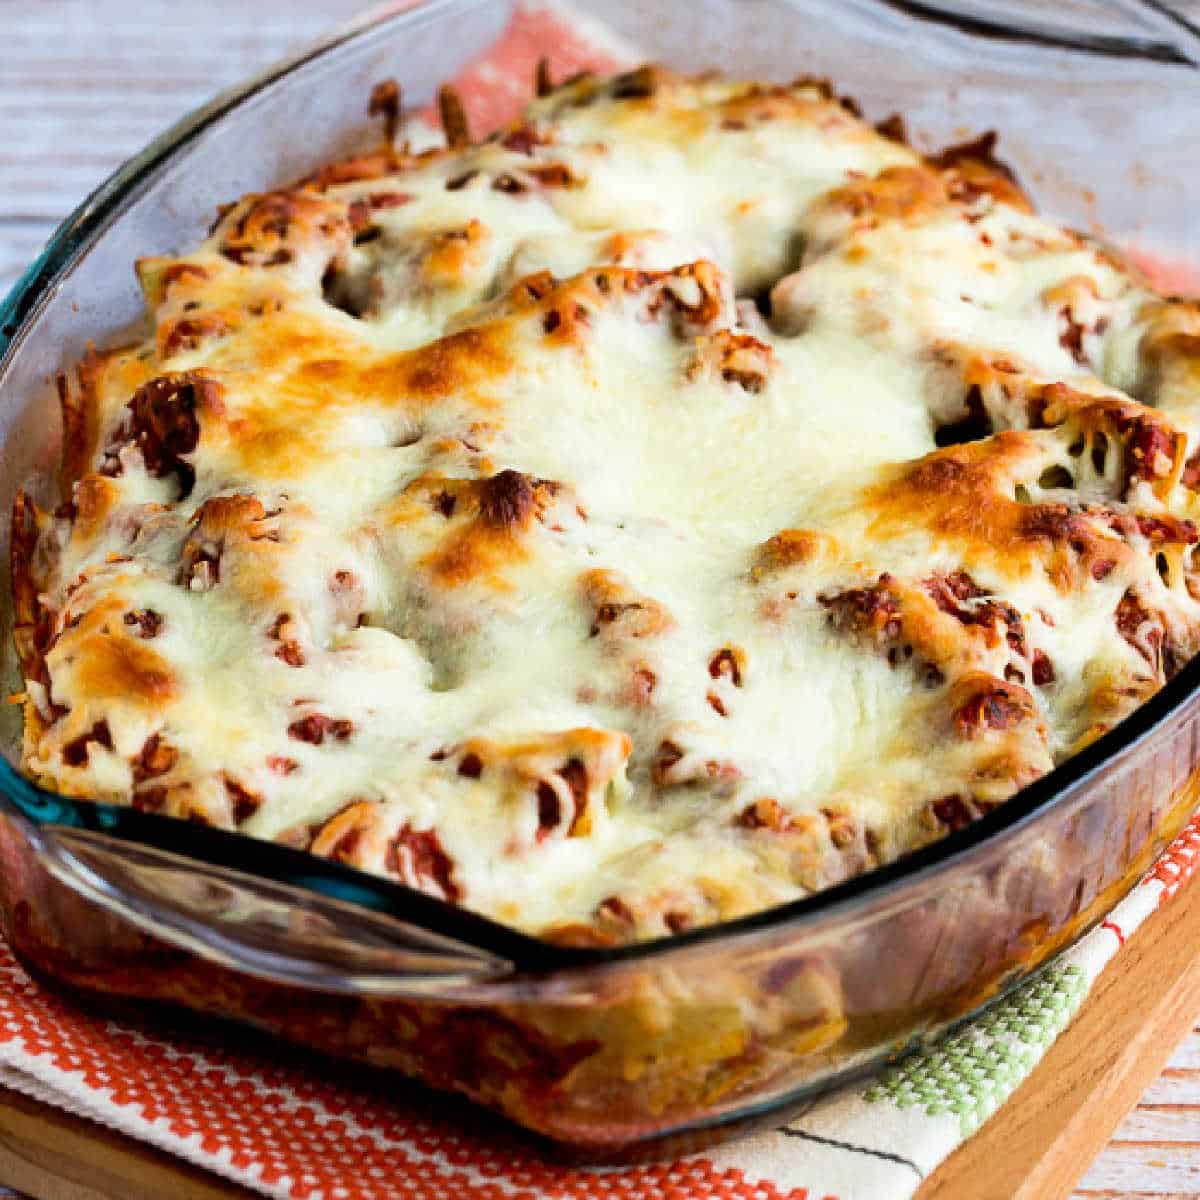 Square image of Meatball Casserole with Artichokes shown in baking dish with melted cheese.